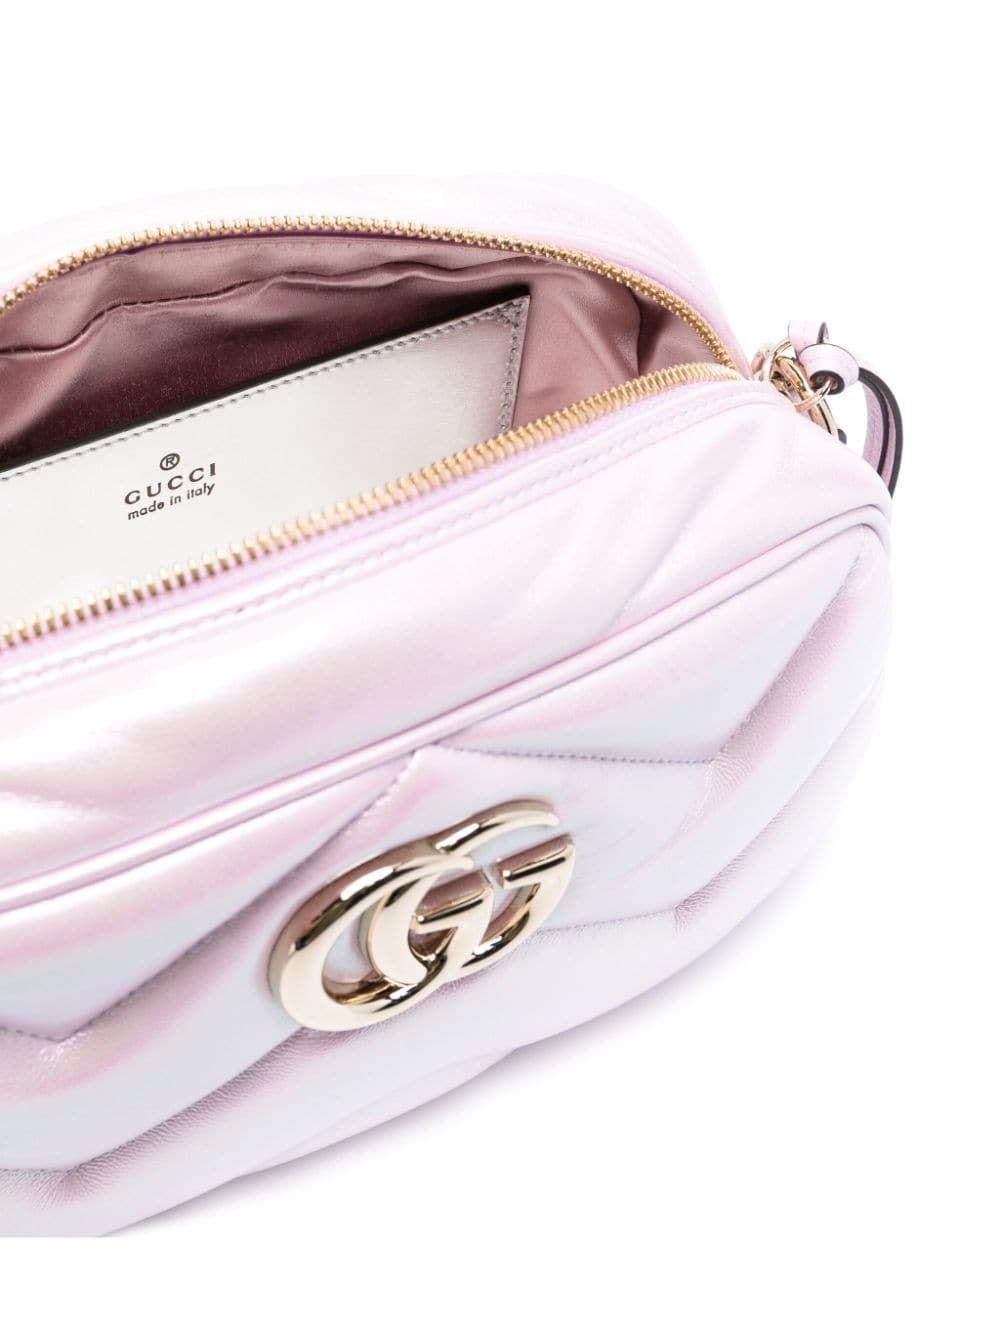 Gg marmont small leather shoulder bag - 4